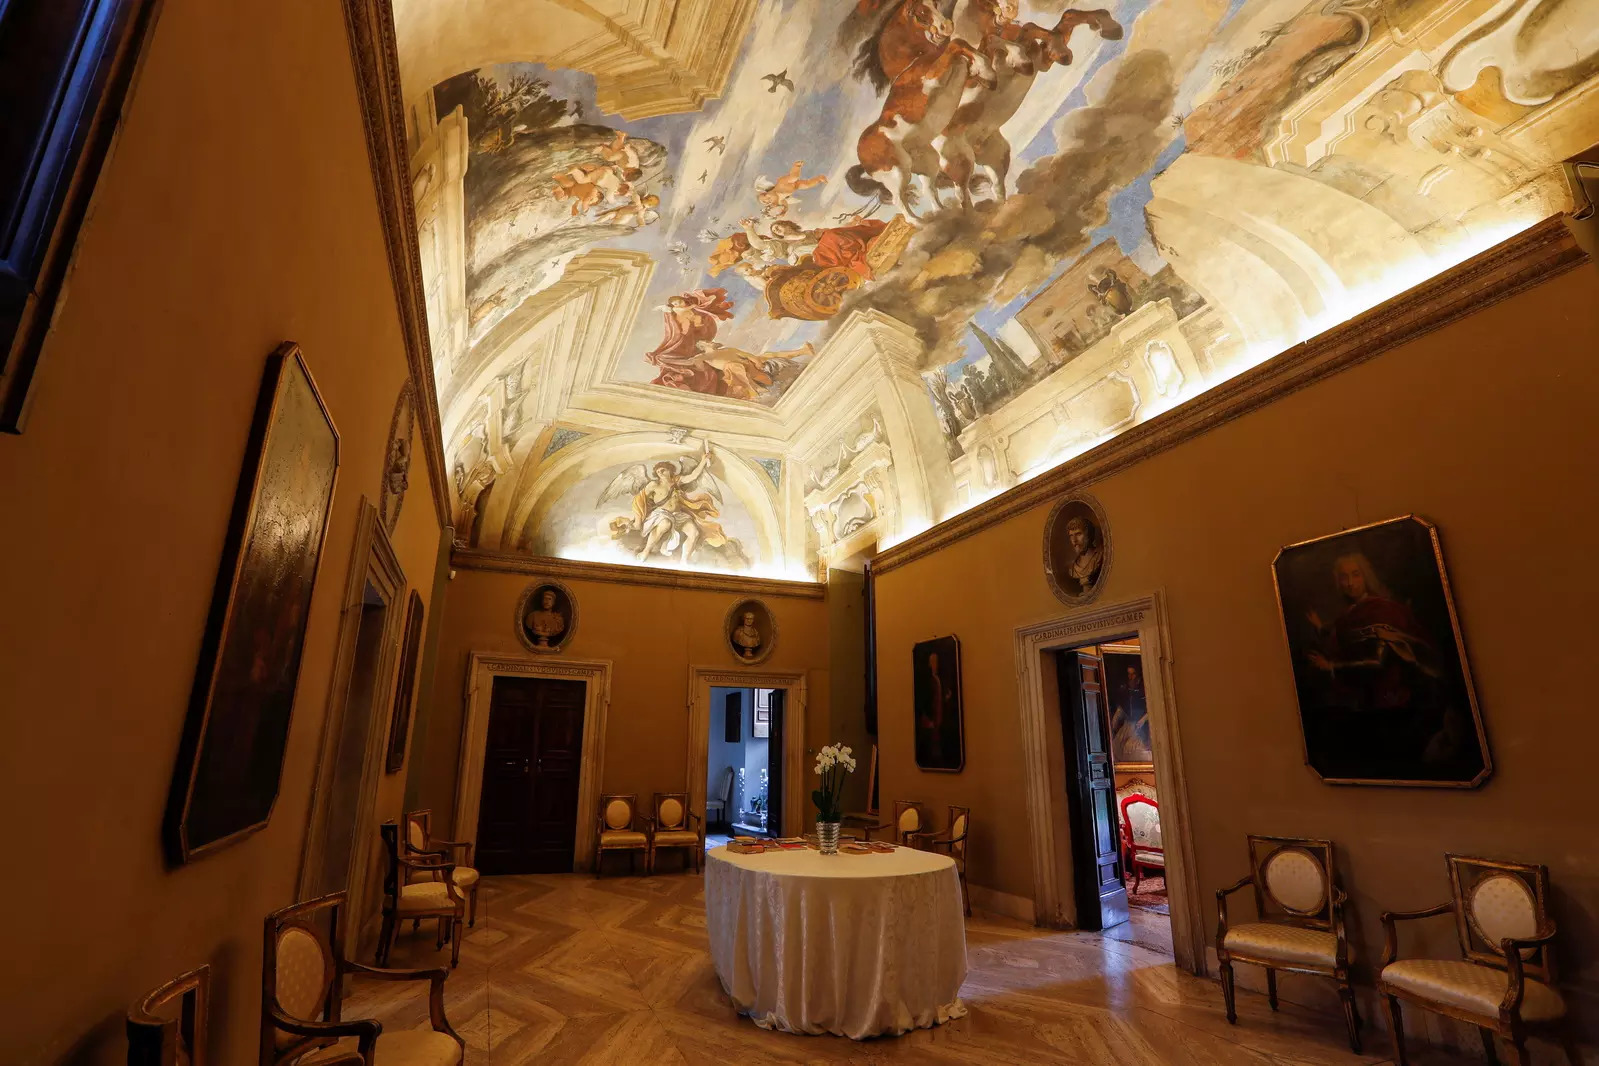 A general view shows a room, with frescoes on the ceiling by Guercino, inside Villa Aurora.